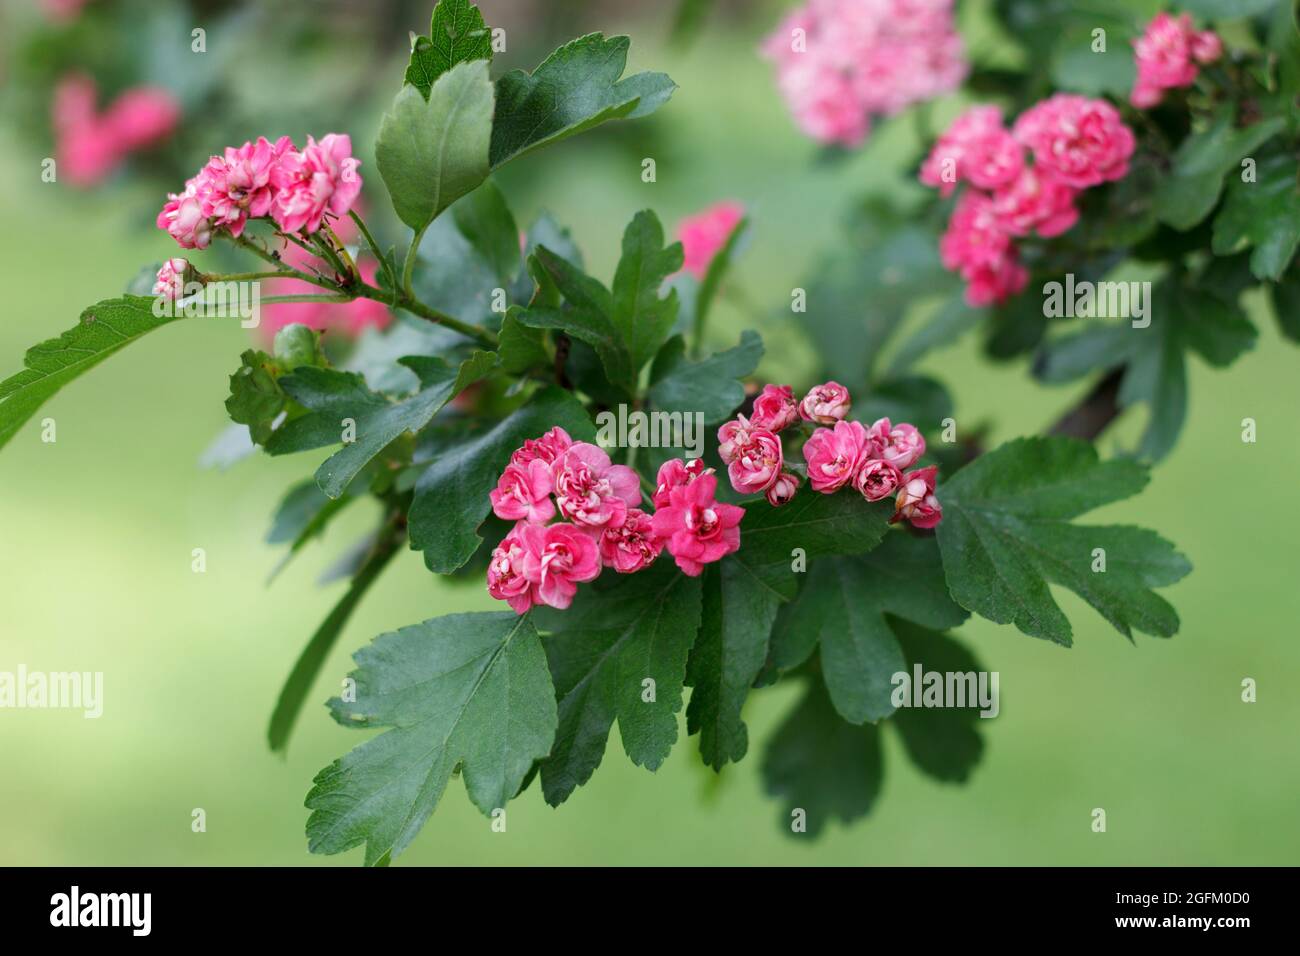 Crataegus laevigata medicinal plant blooms red flowers on green background in spring Stock Photo